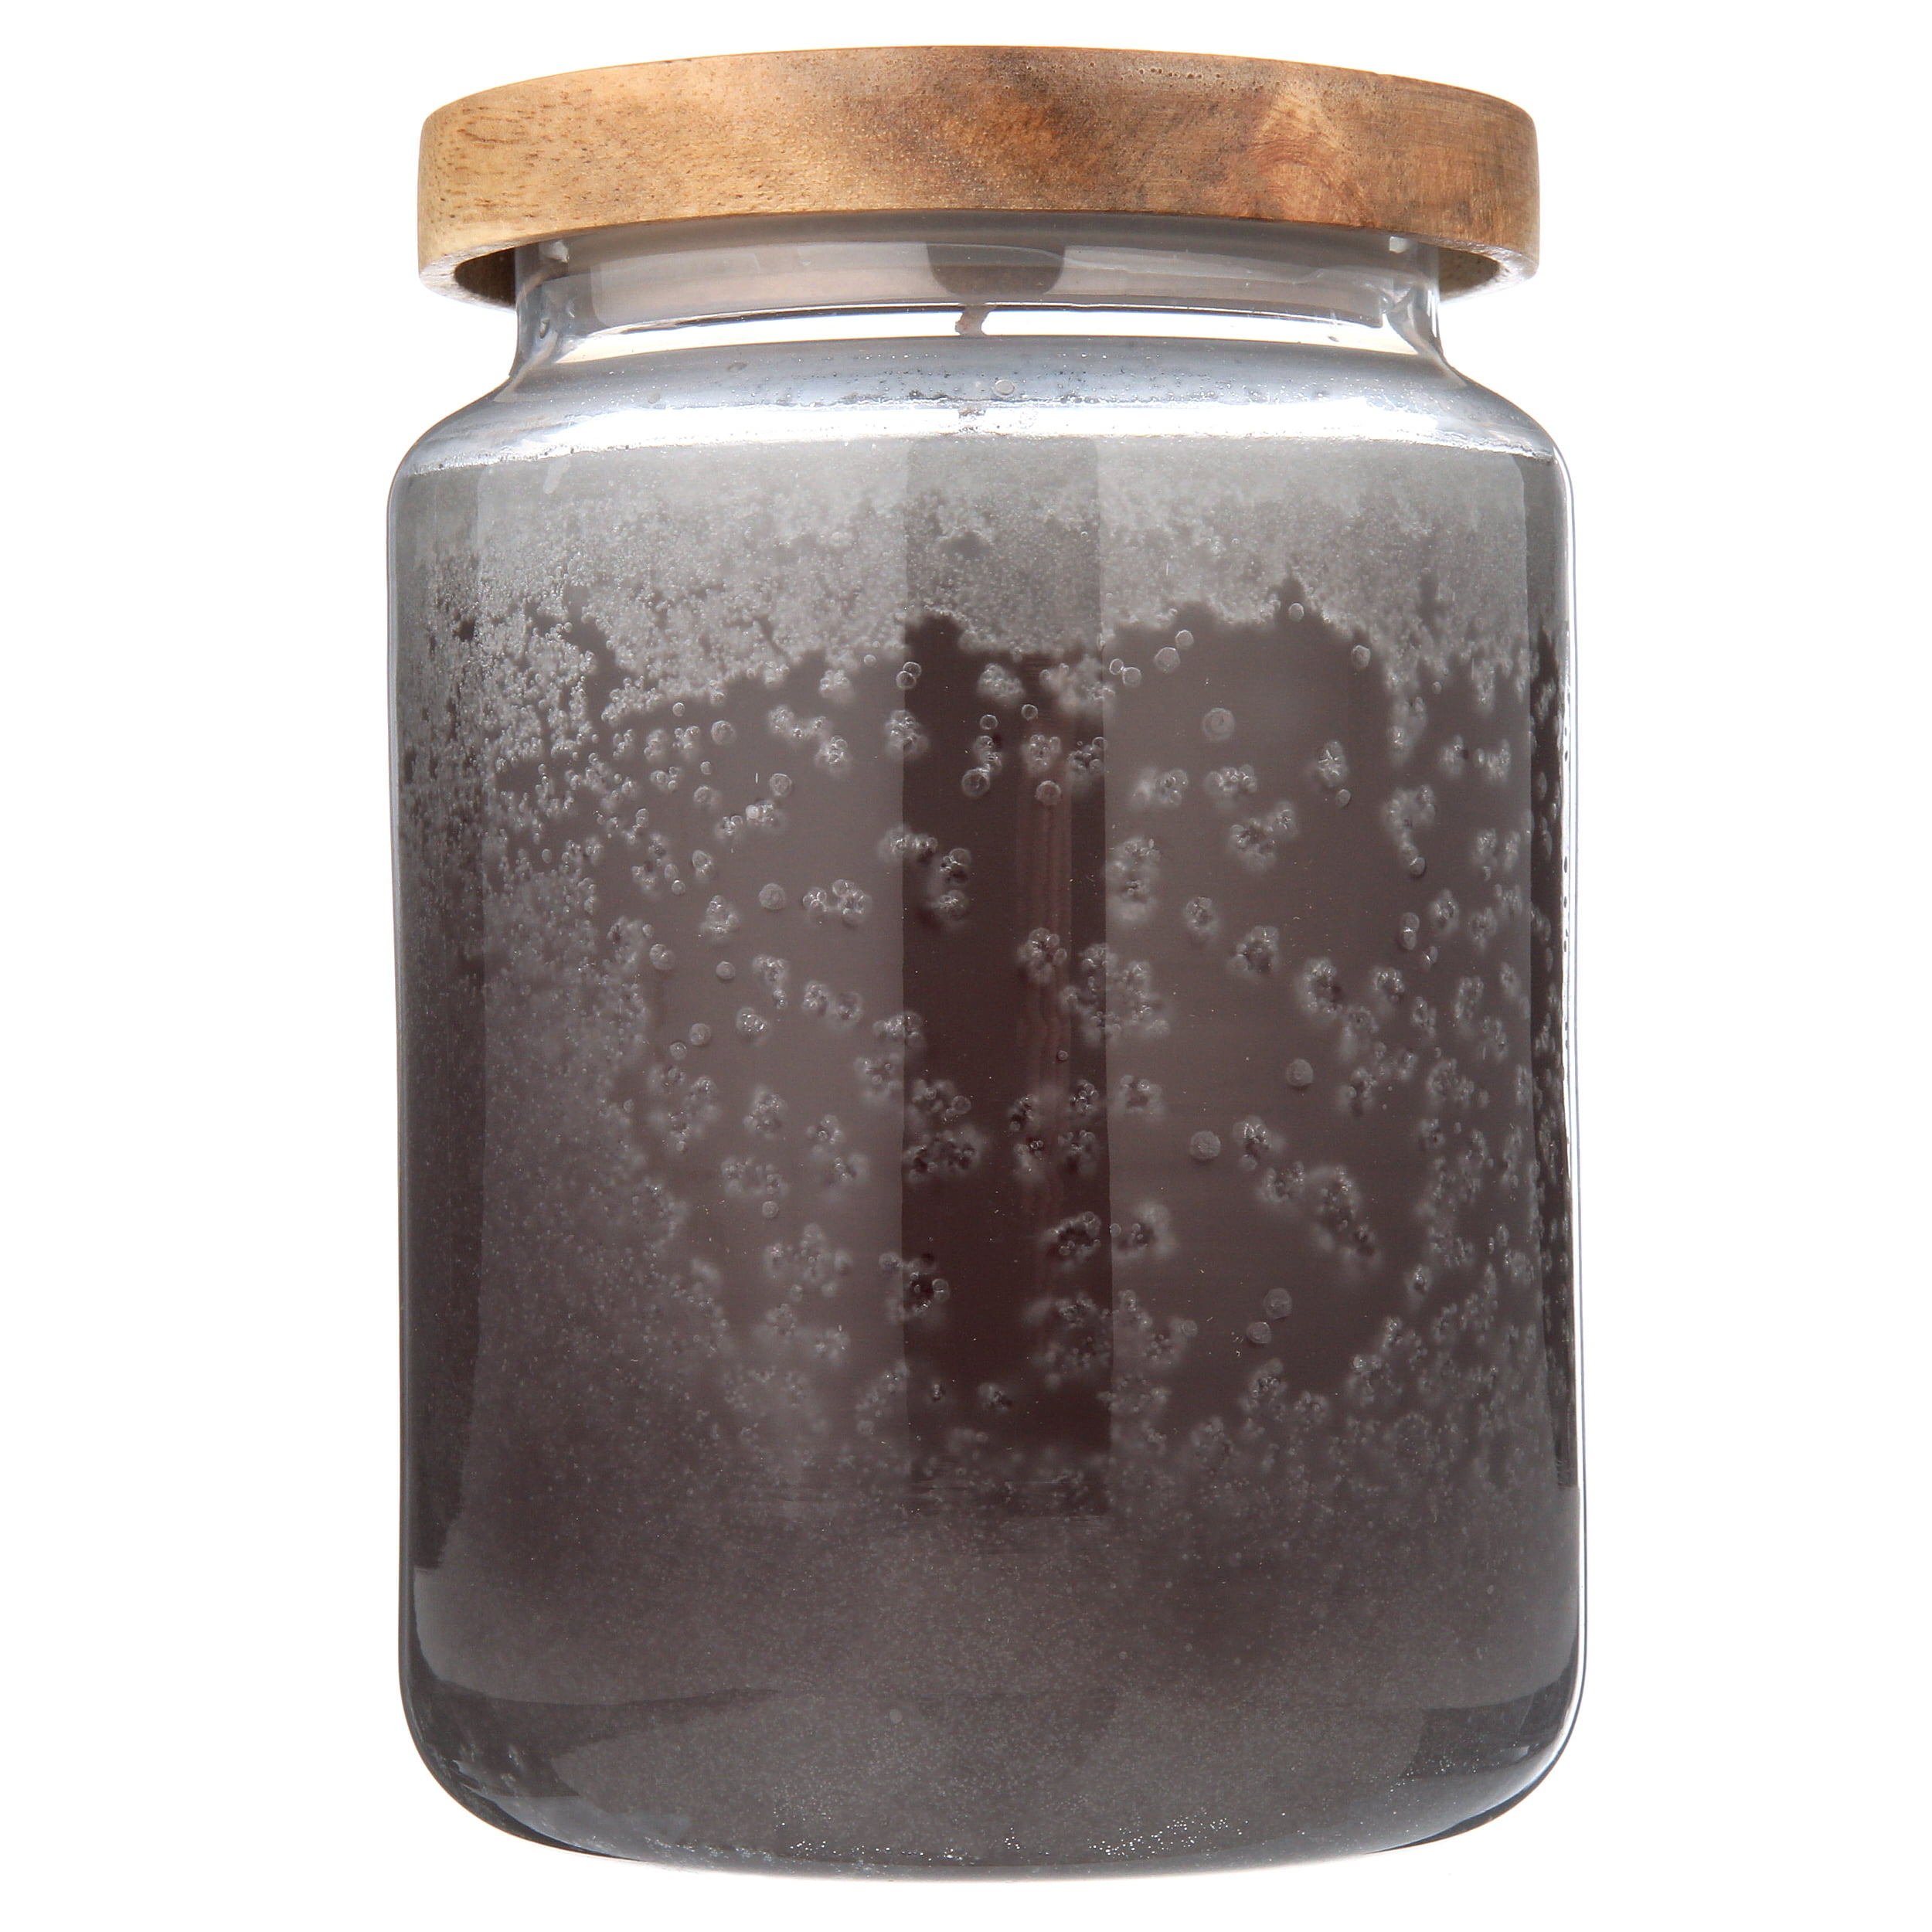 1 Better Homes & Gardens SMOKY GRAY MIST Large Jar Candle 18 oz 